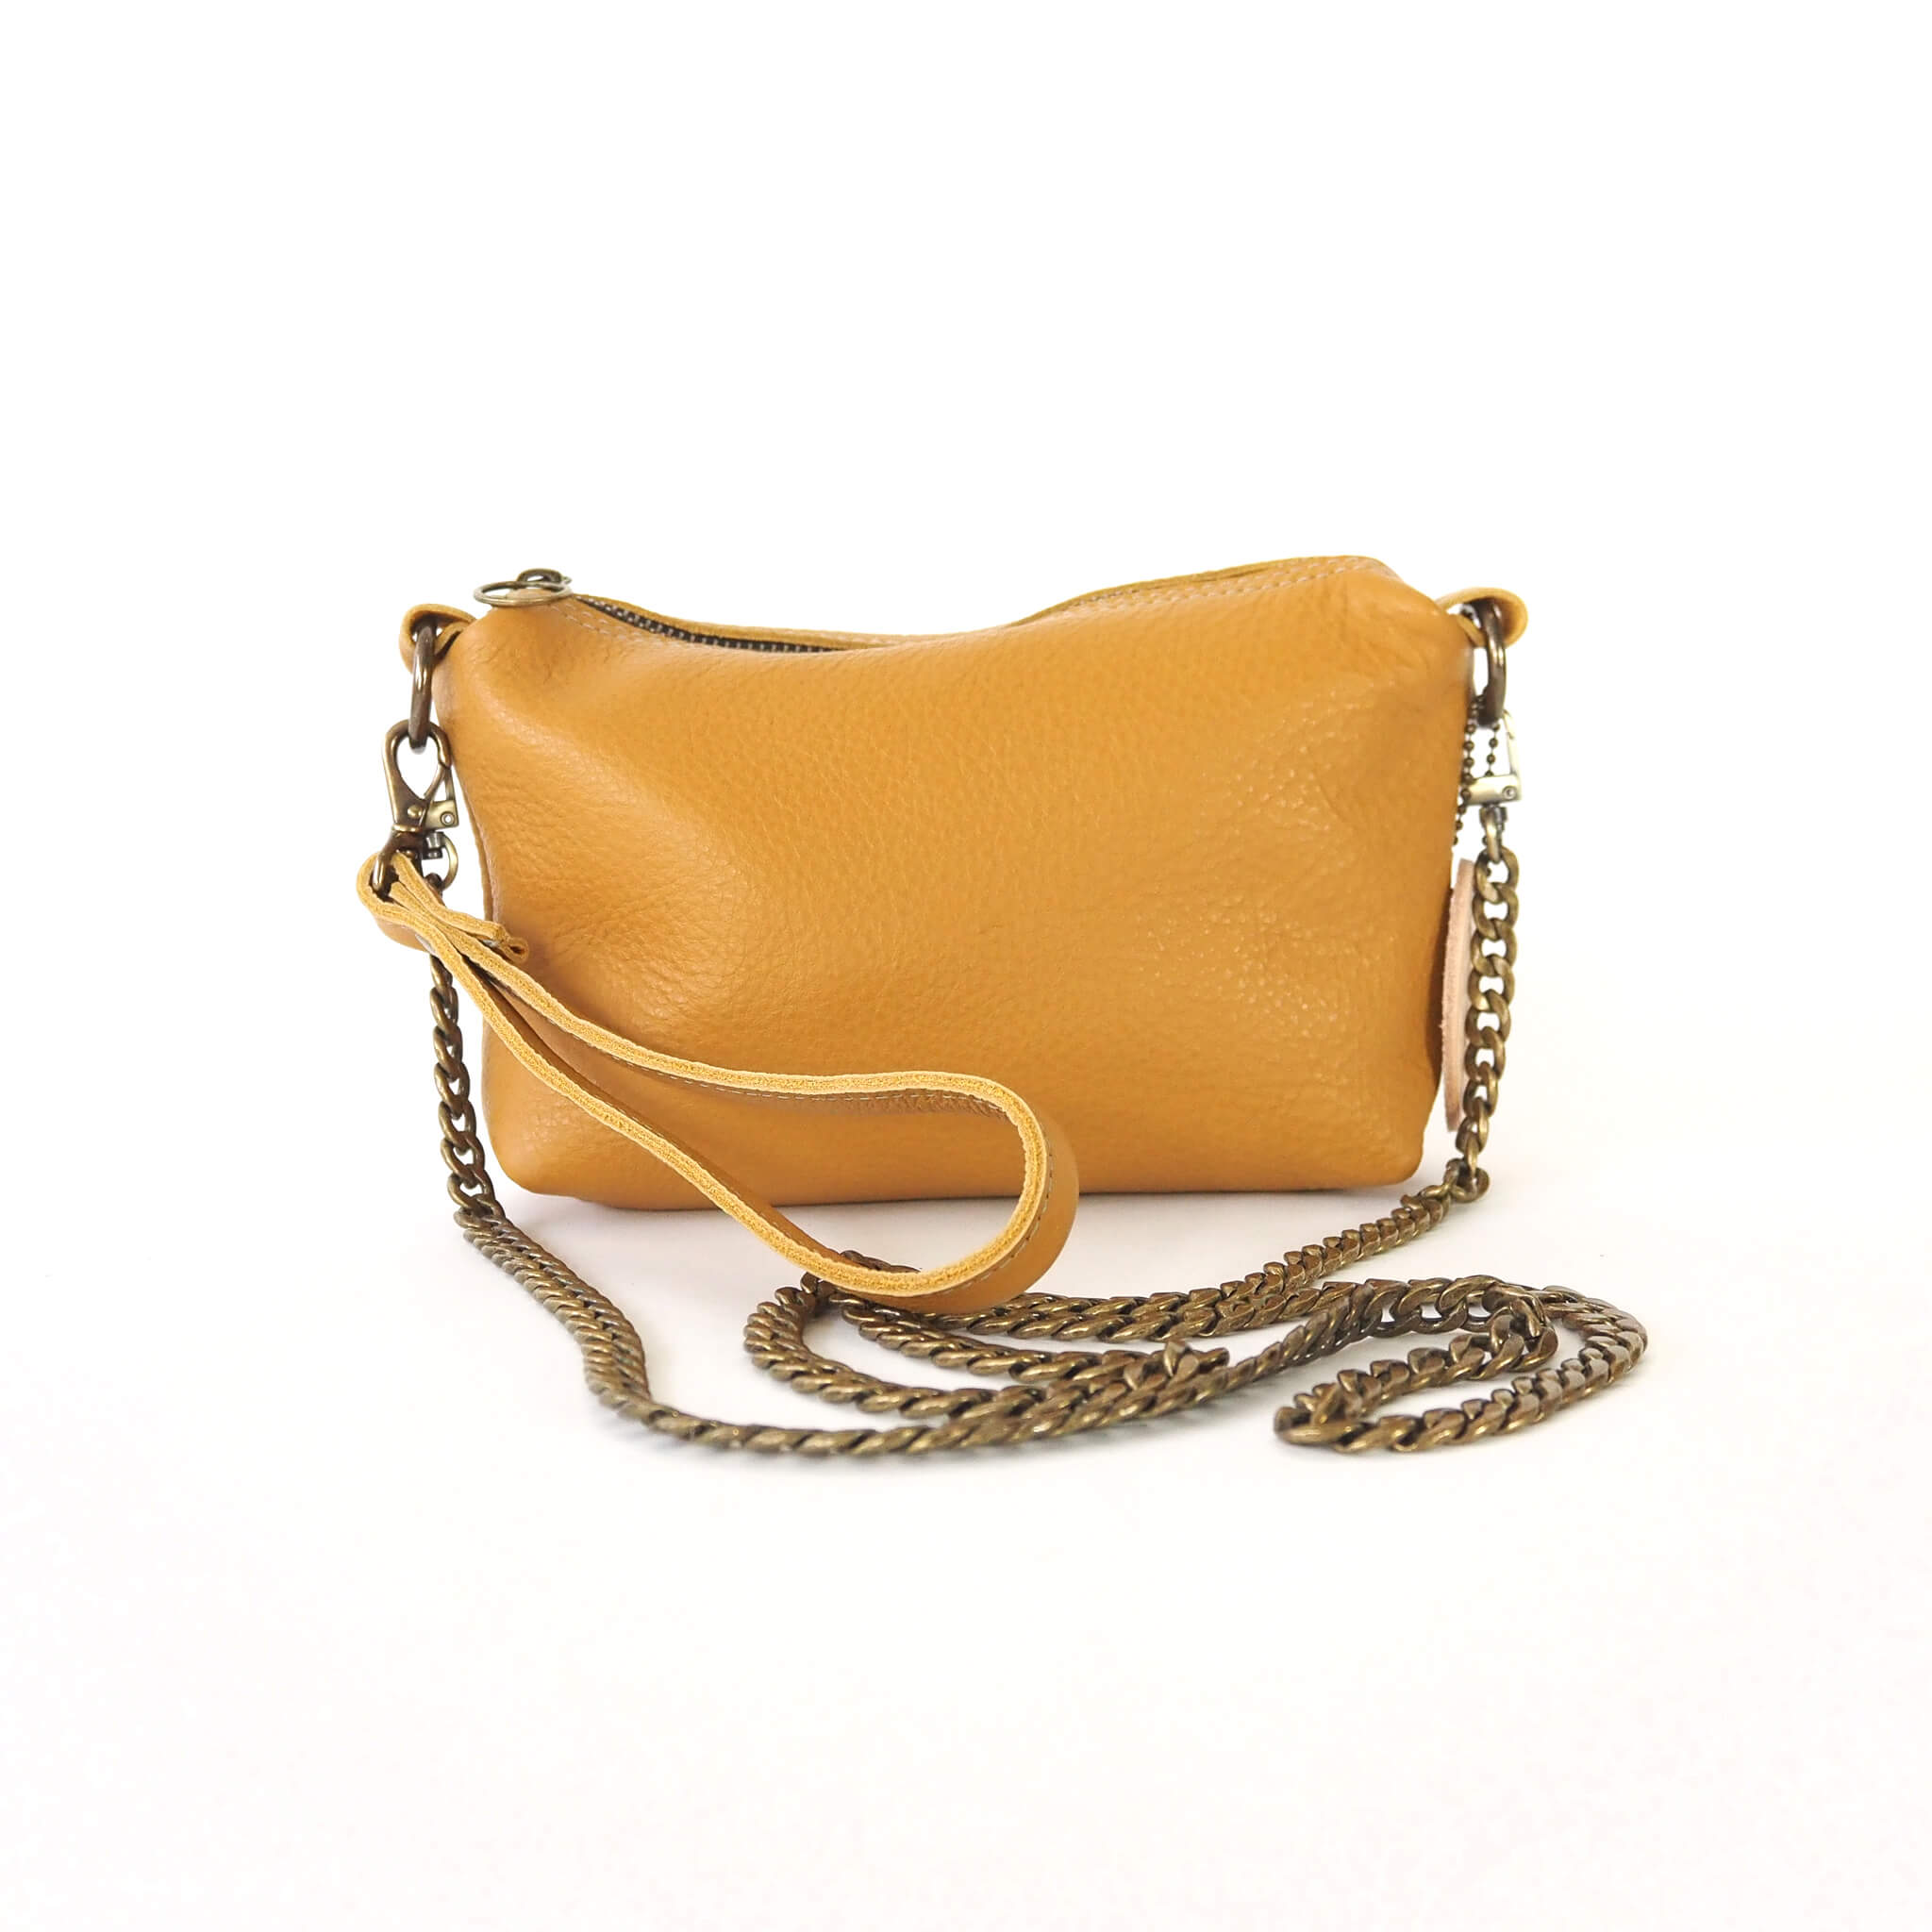 molly crossbody clutch wristlet - handmade leather - marigold front view